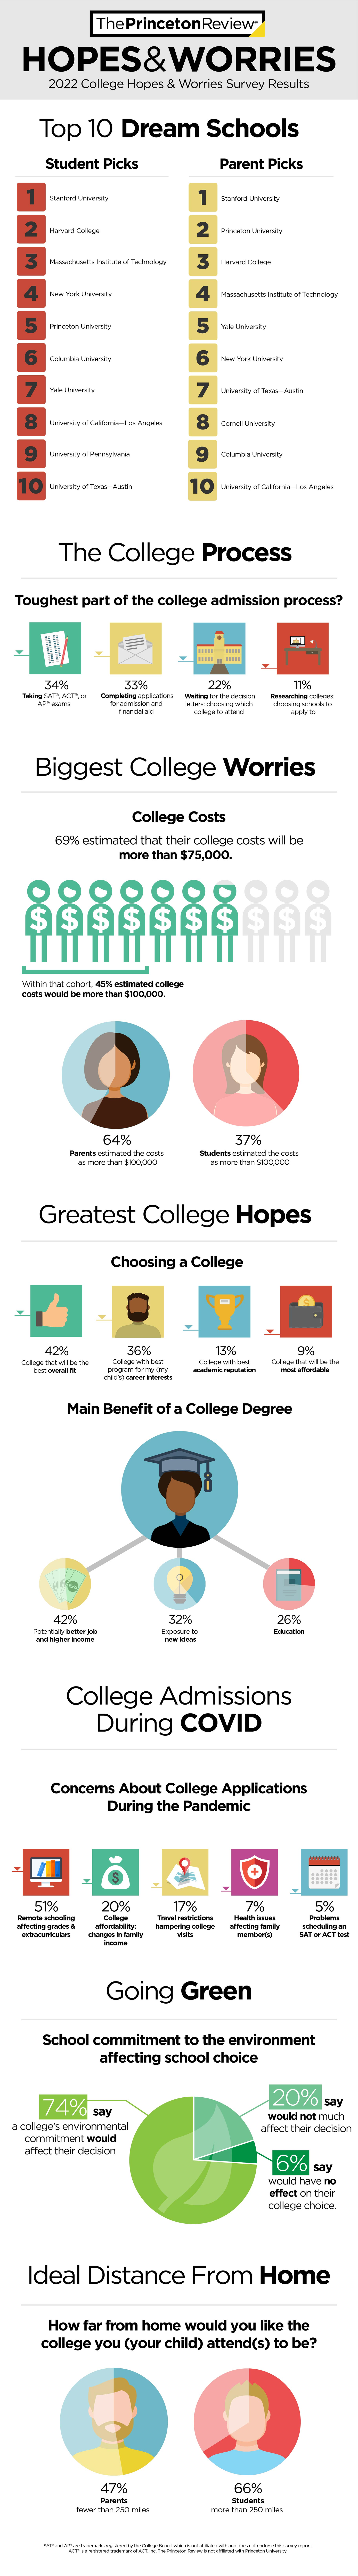 2022 College Hopes & Worries Infographic